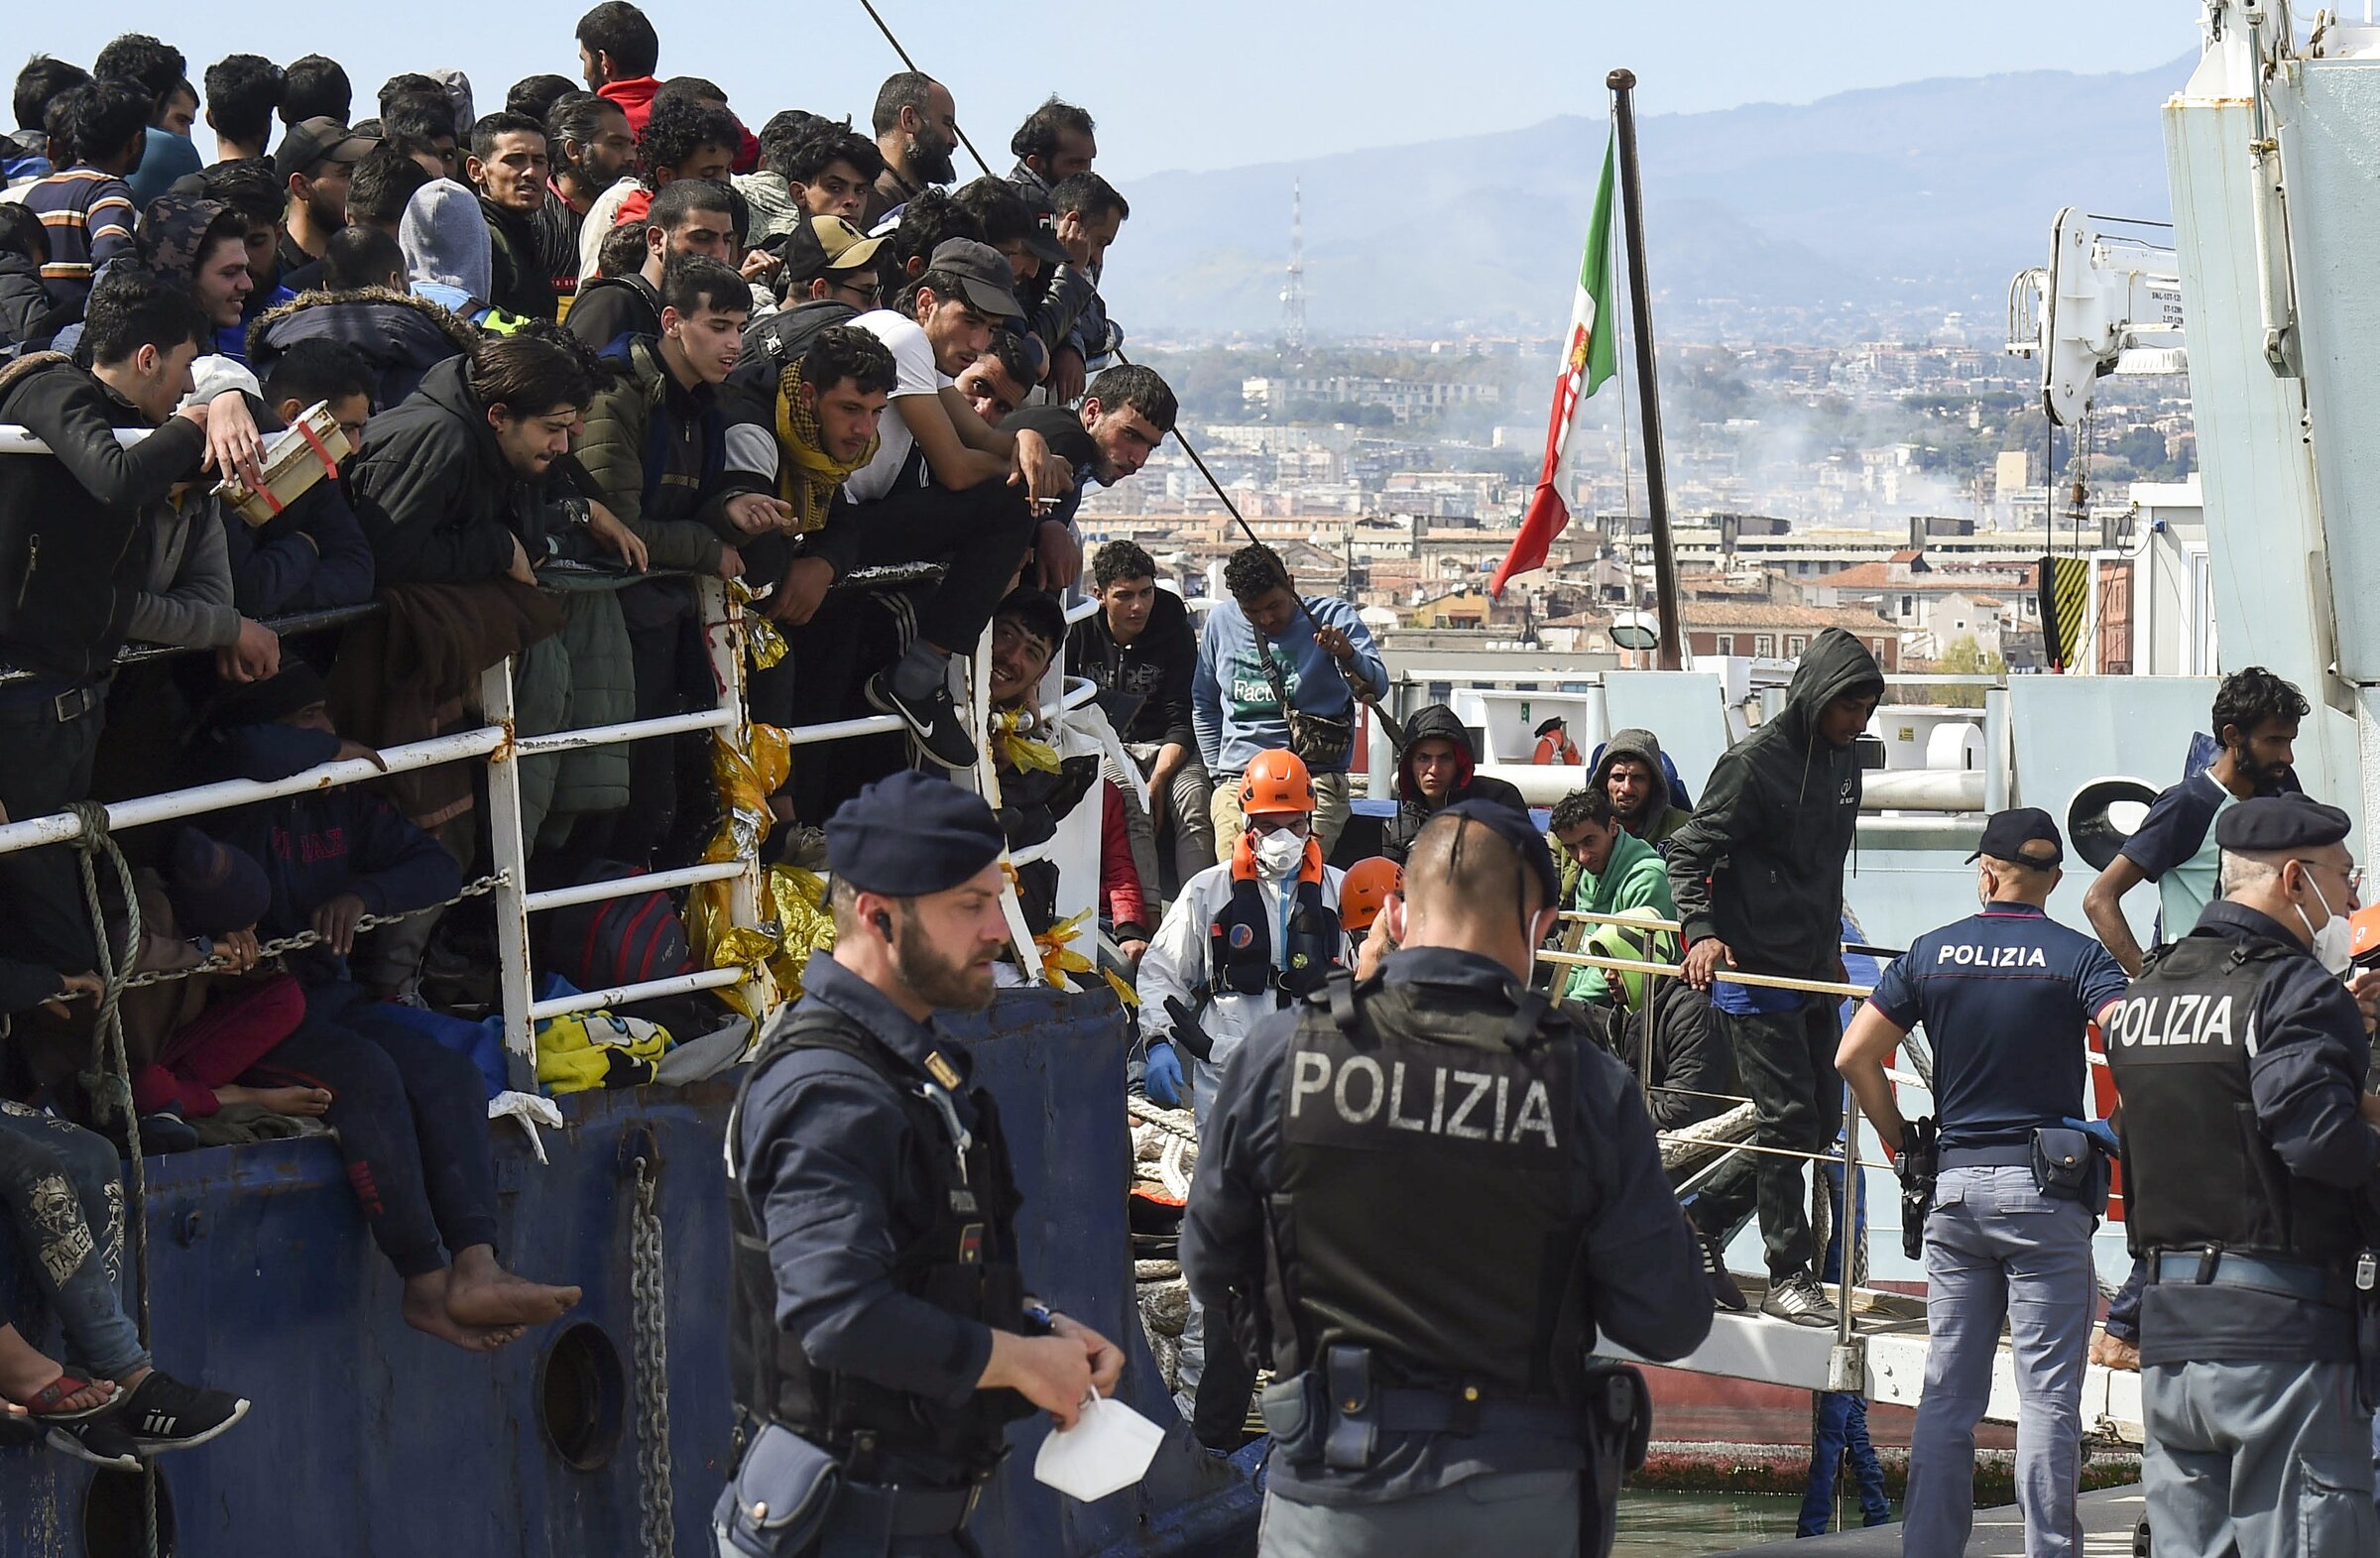 Deadliest Quarter for Migrants in the Central Mediterranean Since